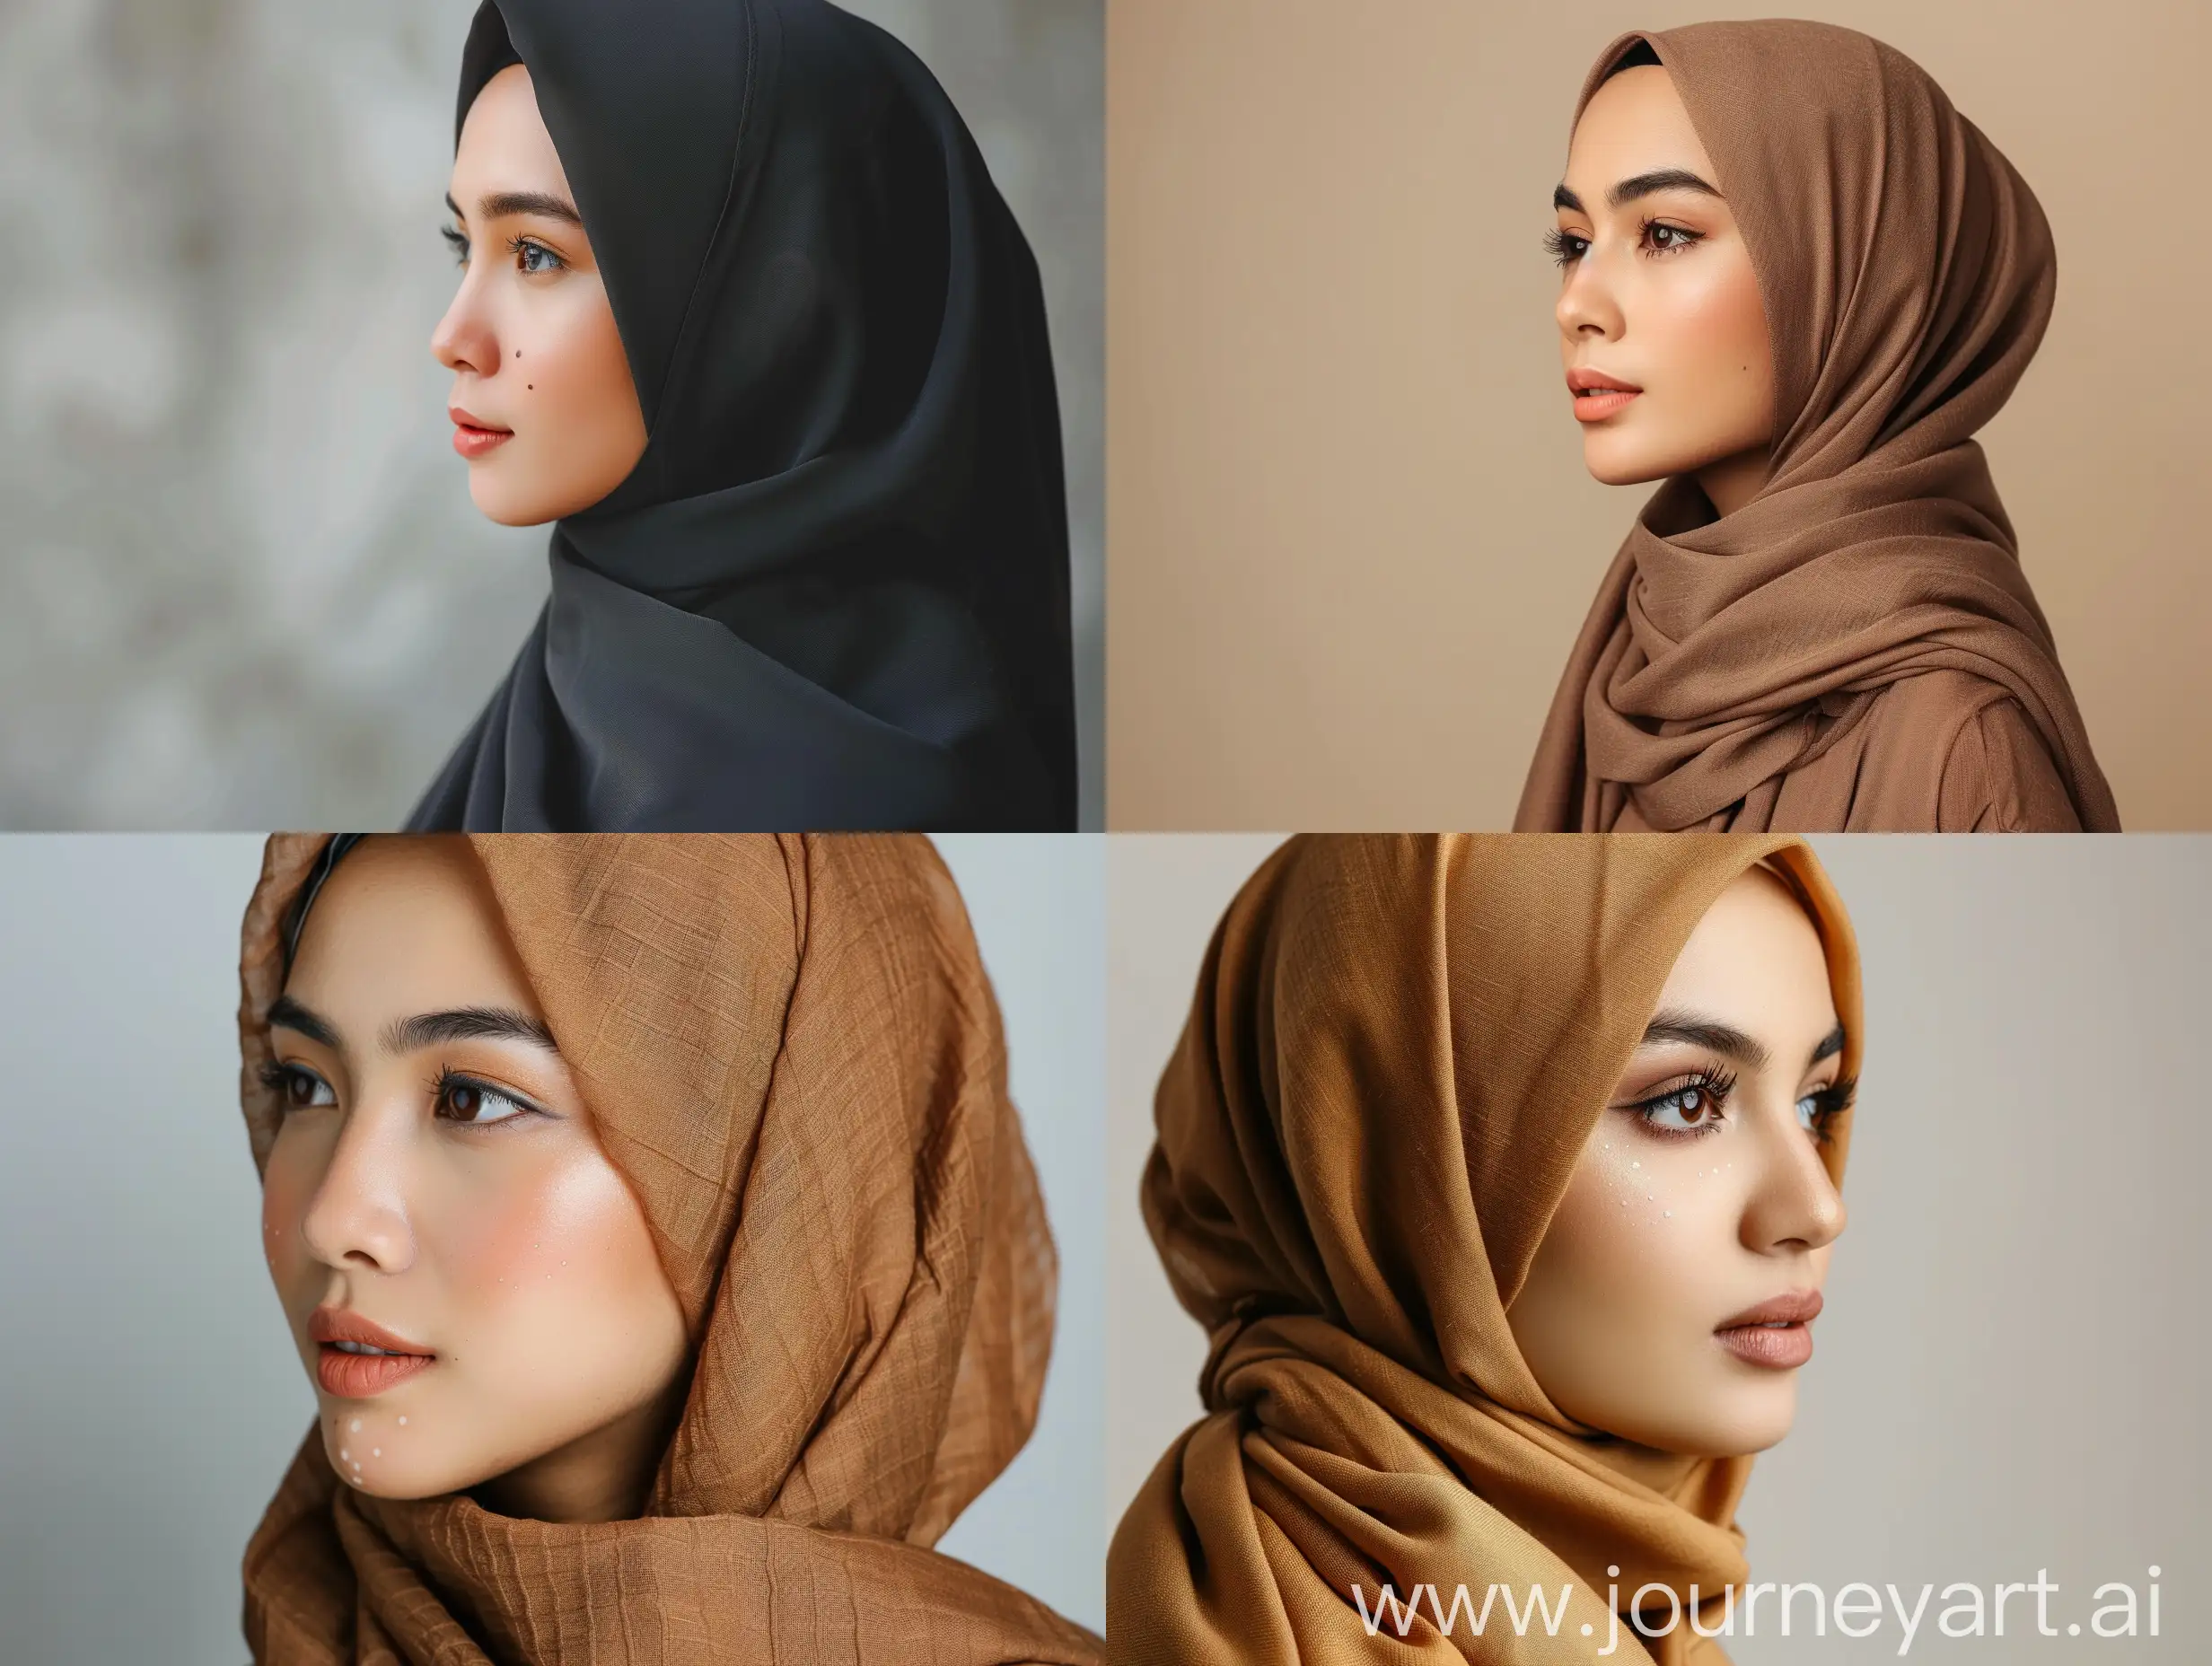 a beautiful Indonesian woman, 25 years old, wearing a hijab, there are dimples in her cheeks, looking to the side, side view, 